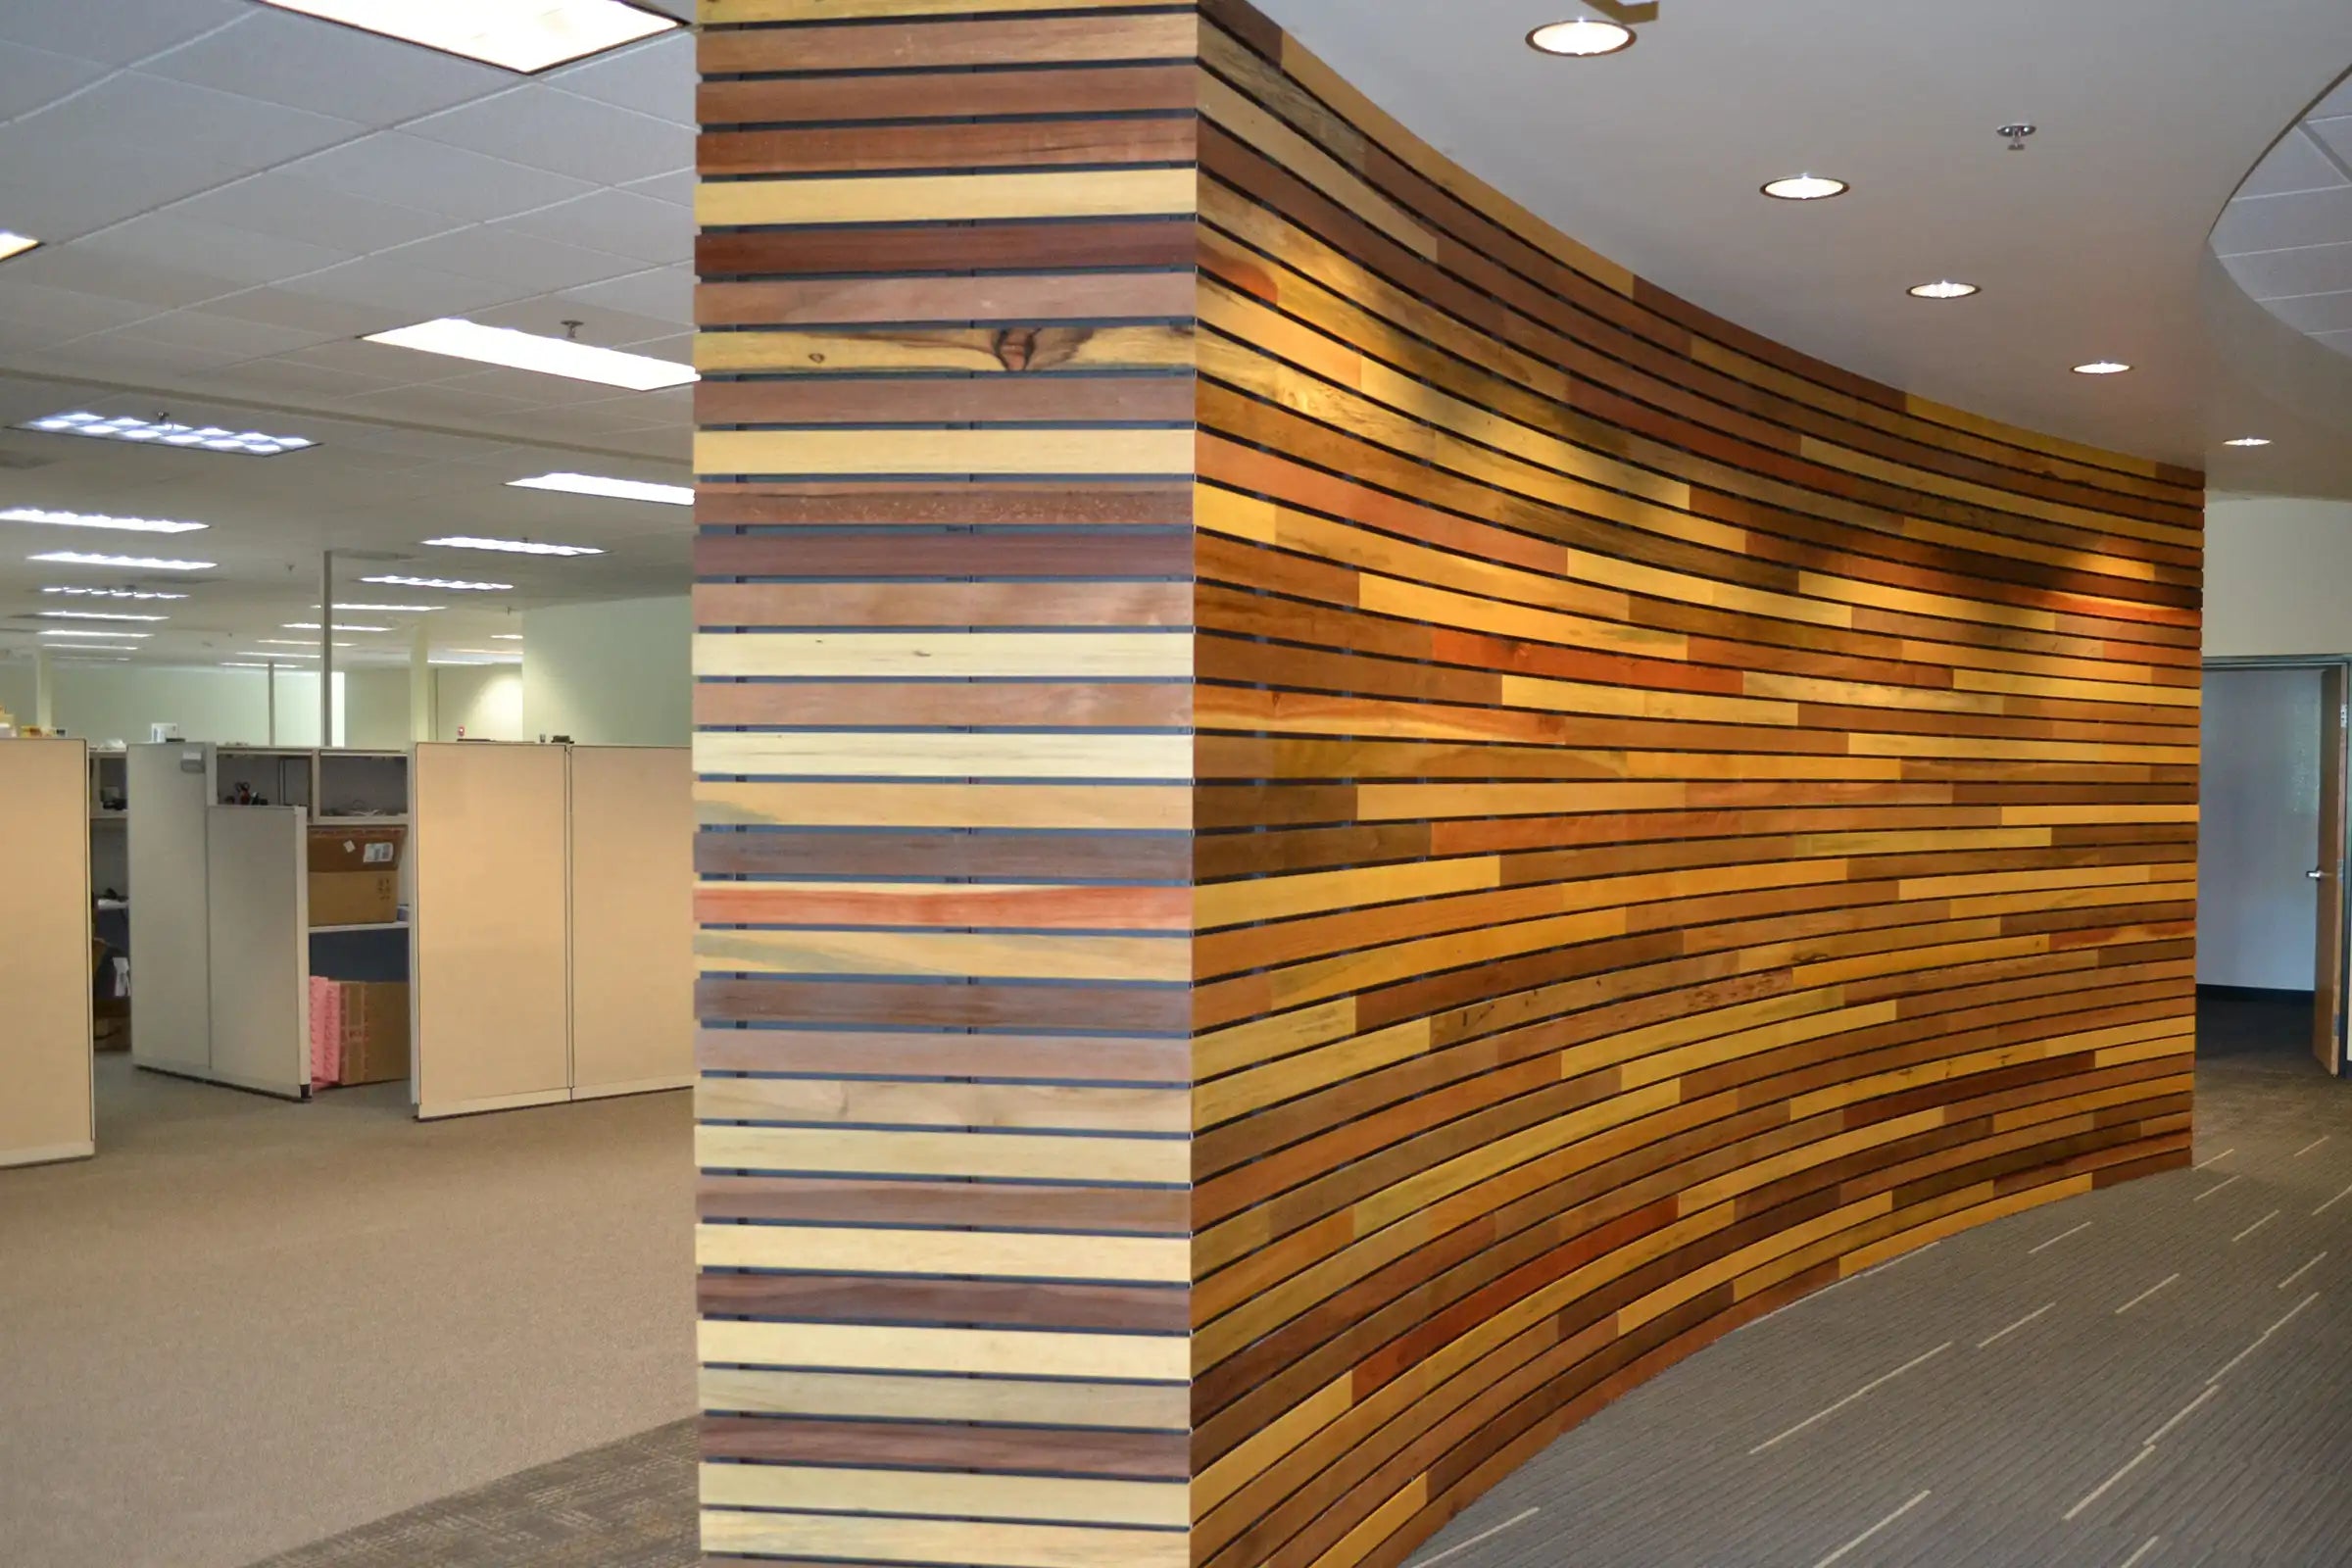 WD Walls sustainable wood paneling plank accent wall materials